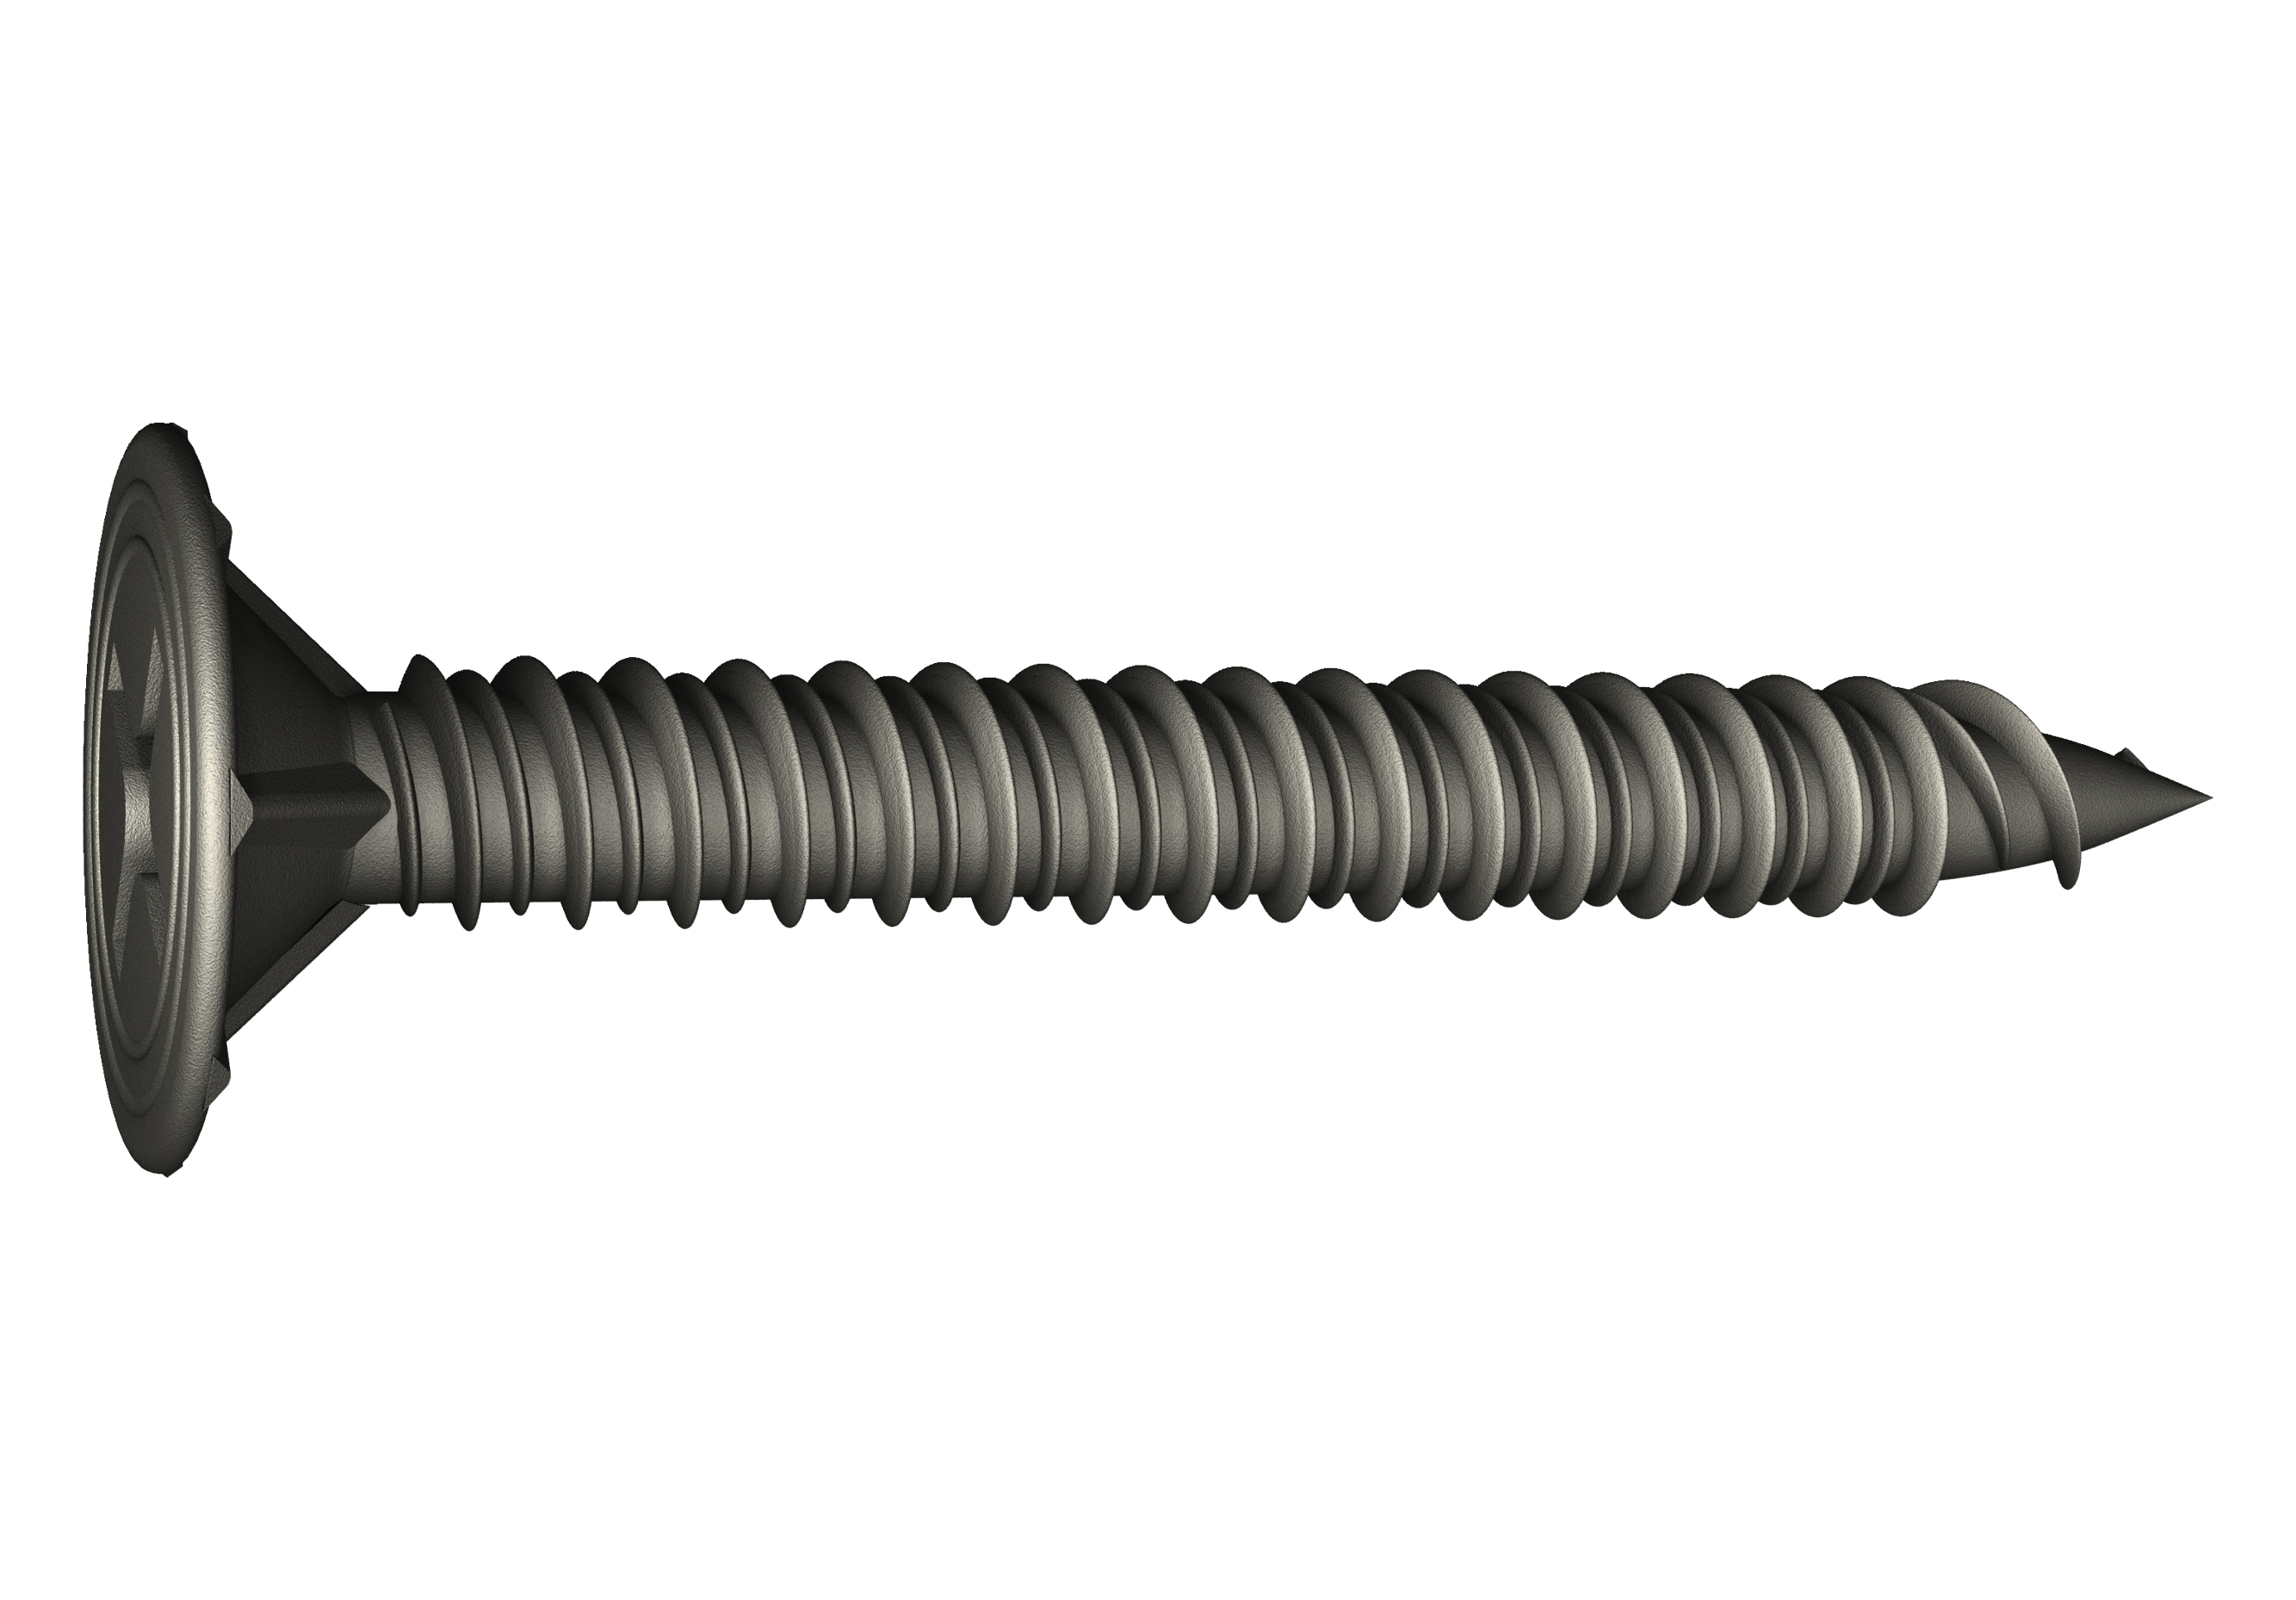 TOTE #8x1-1/4 Cement Board wood
Screw
(For wood / light gauge steel) - Kilrich Building Centres